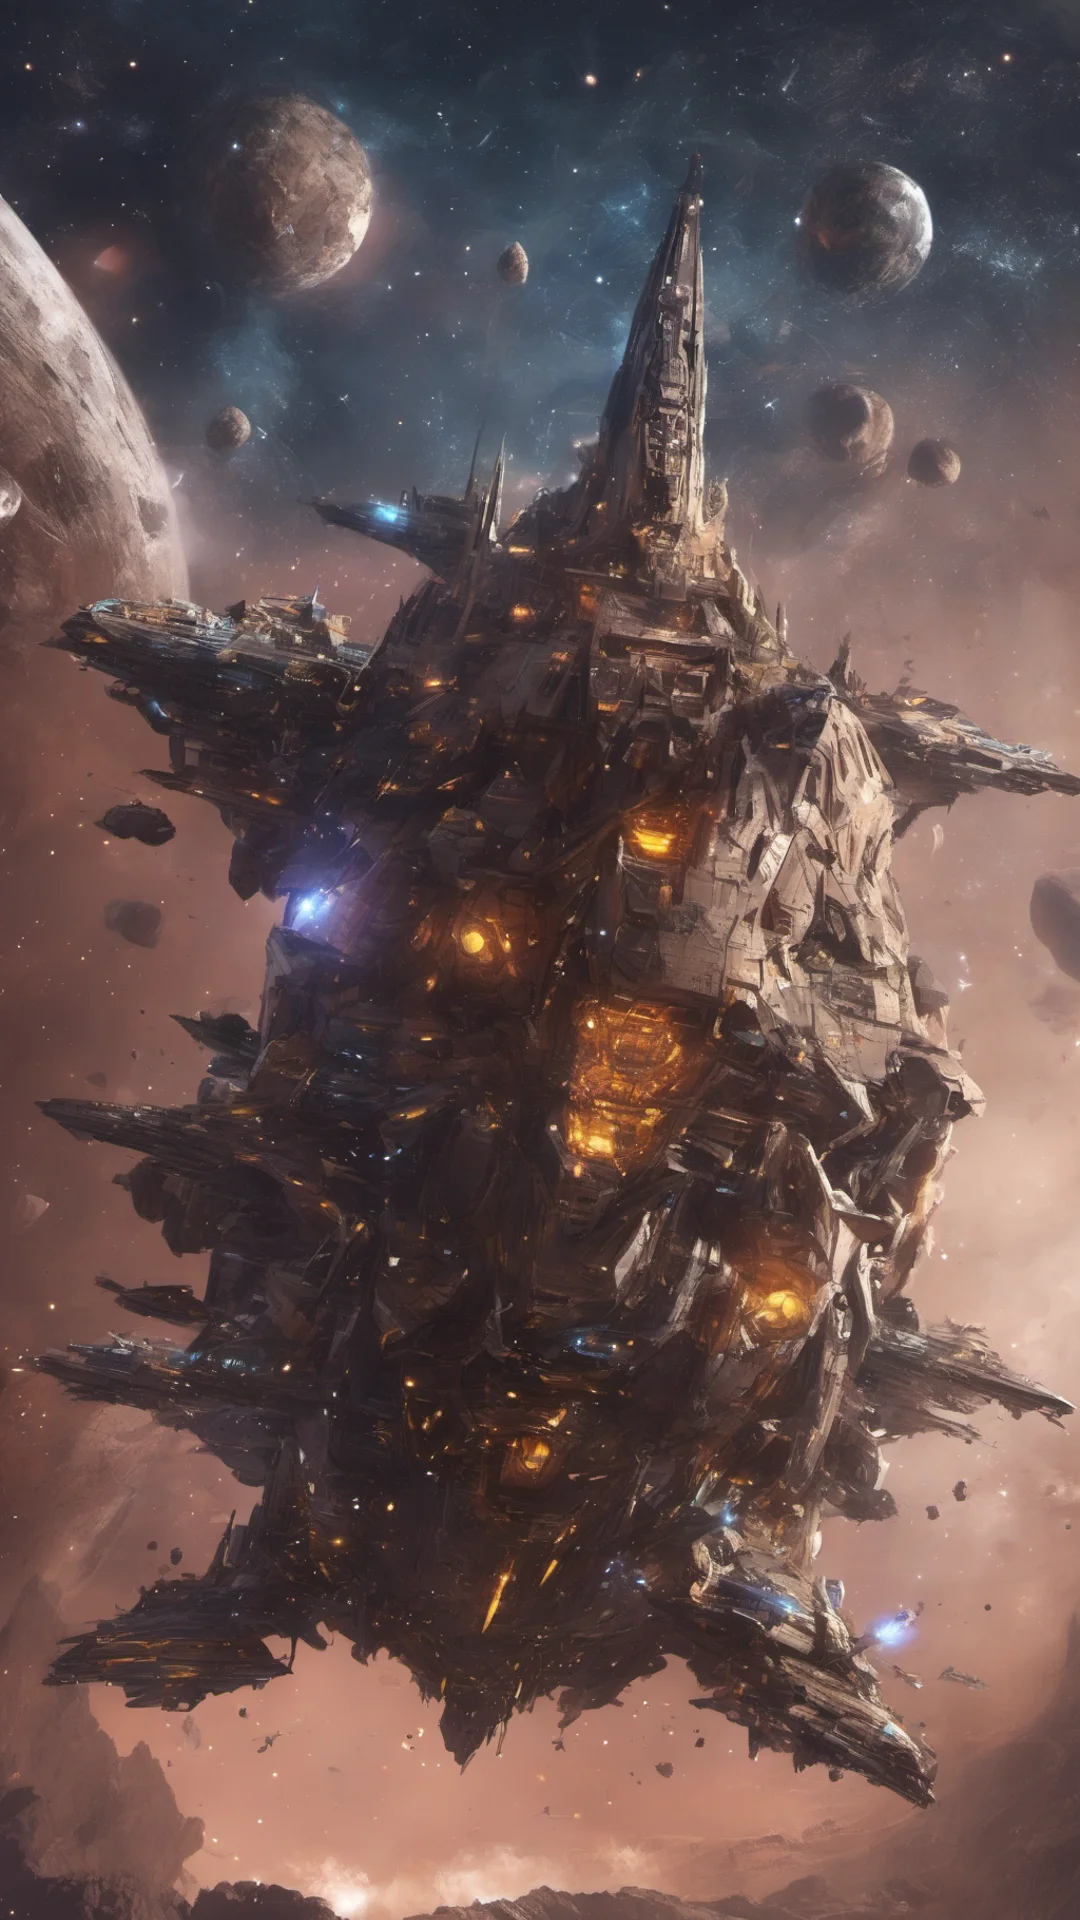 space ship fantasy stary space rock planet epic space ship battle  amazing awesome portrait 2 tall